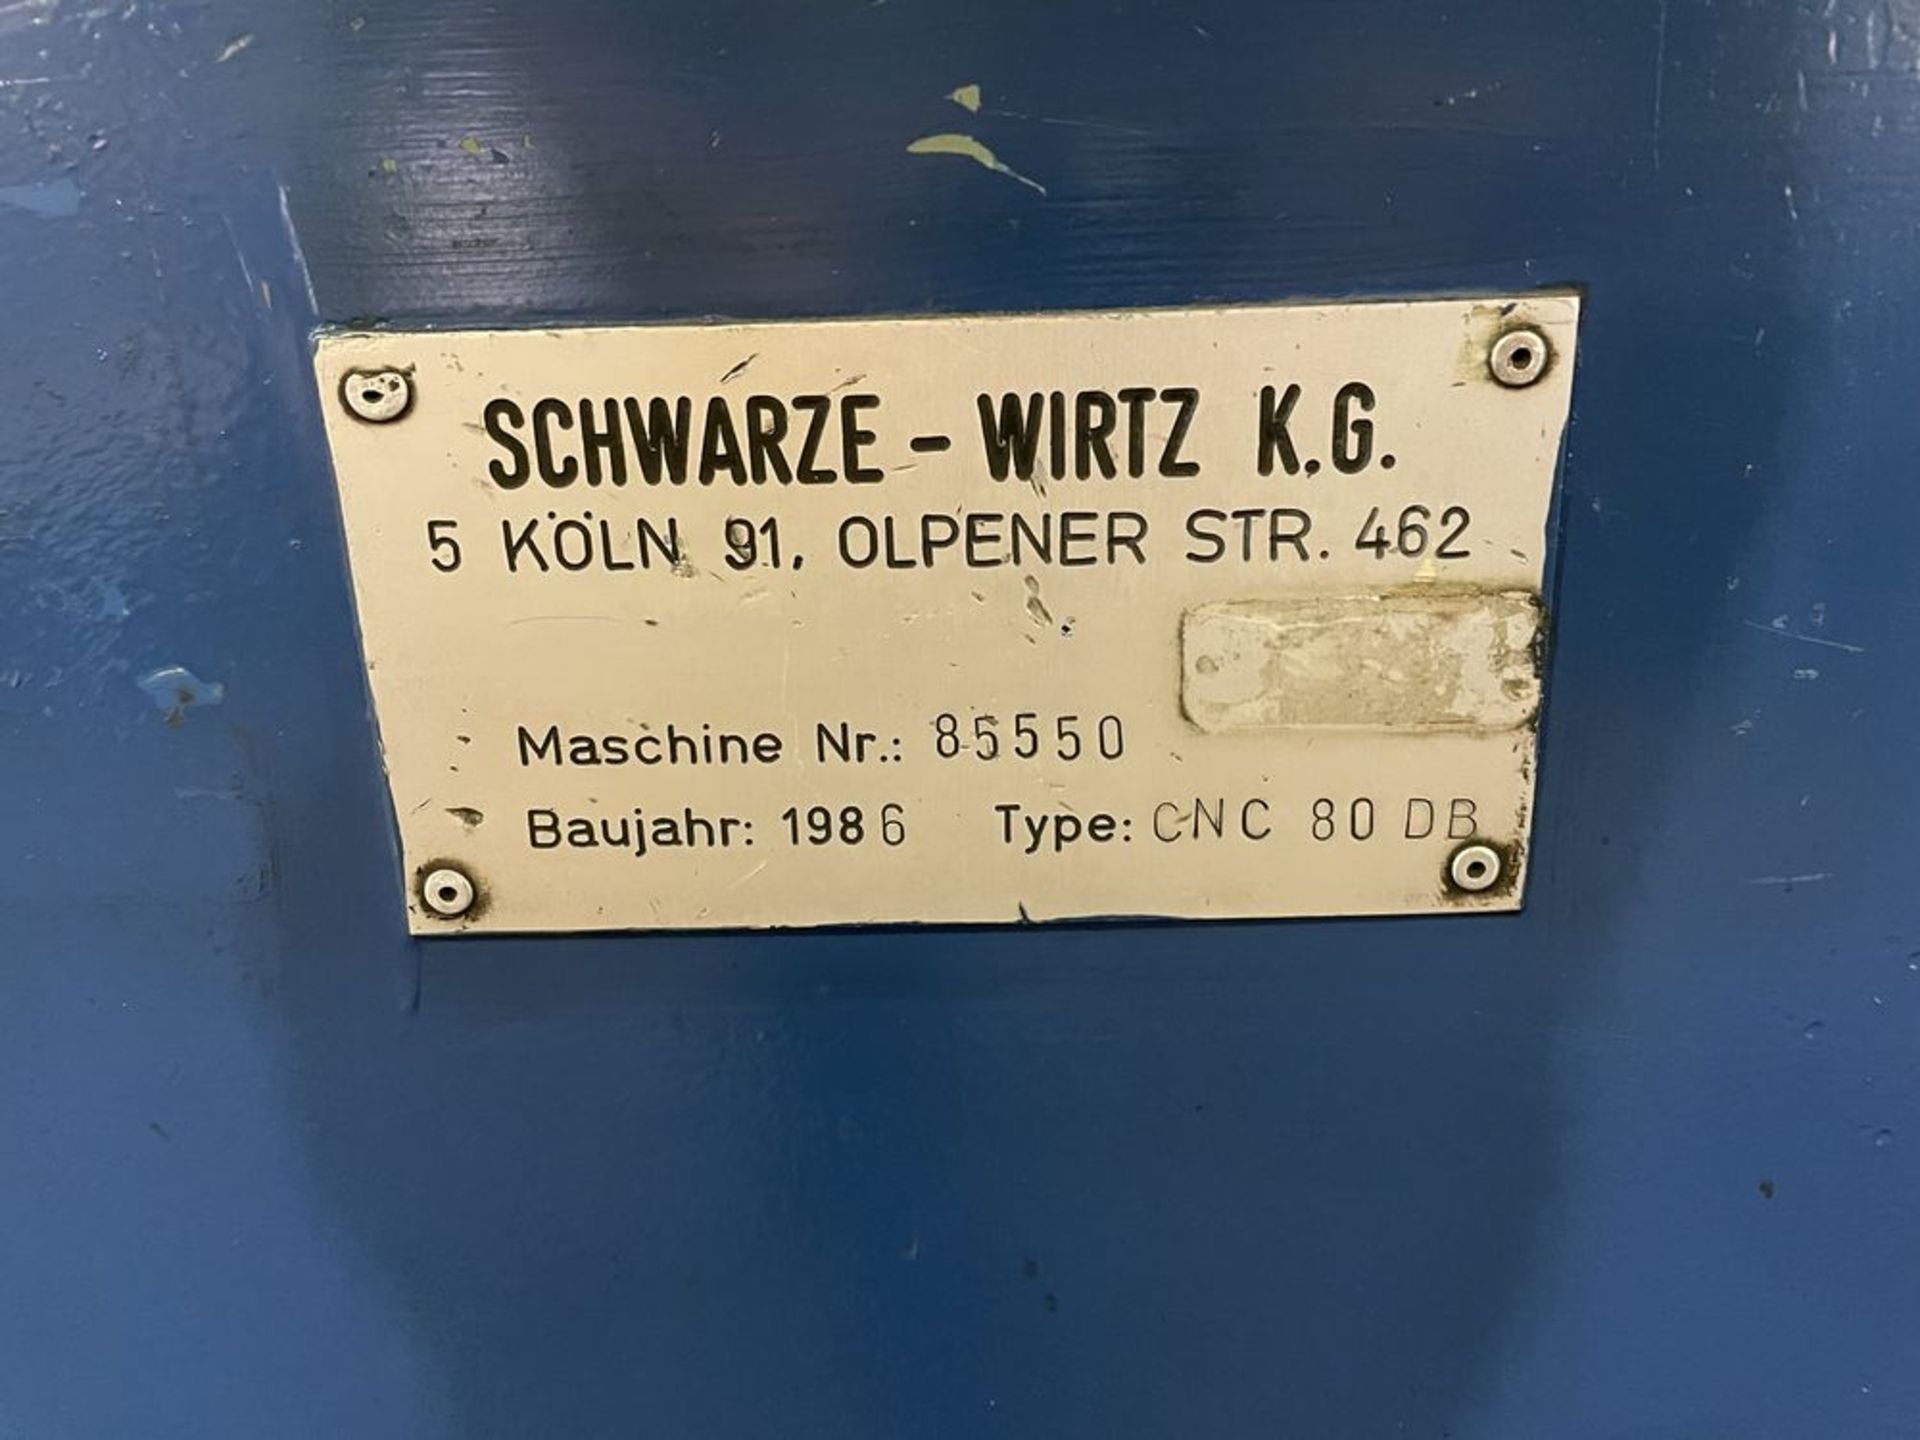 Schwarze-Wirtz CNC 80 DB 3.25″ Tube Bender w/ BendPro Controller, Automation and Tooling - Image 11 of 23